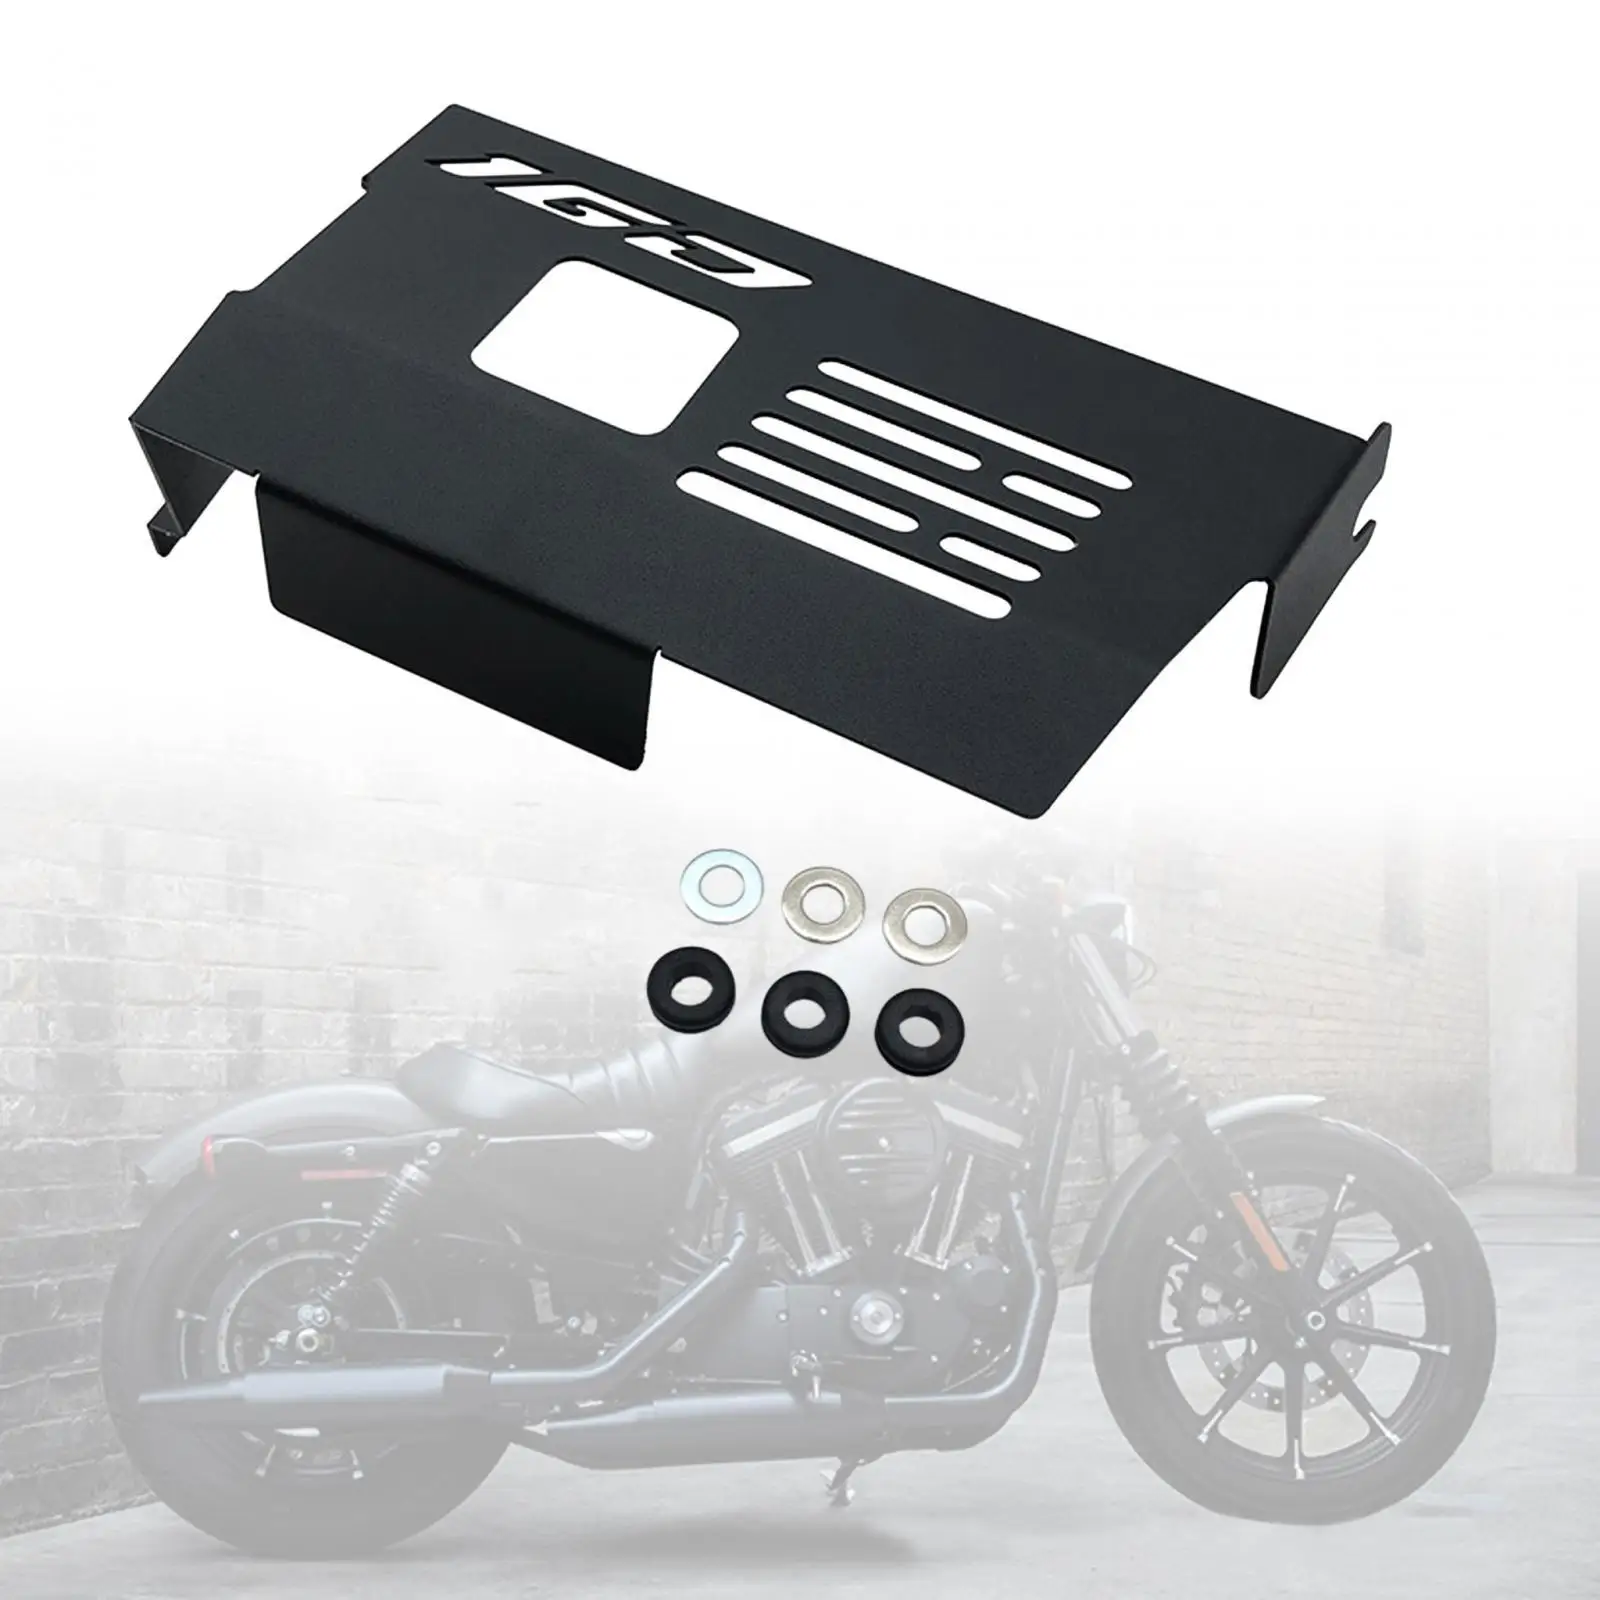 Motorcycle Engine Chassis Protection Guard Cover,Skid Plate Pan Protector Shell Motorcycle Engine Protector Protective Covers